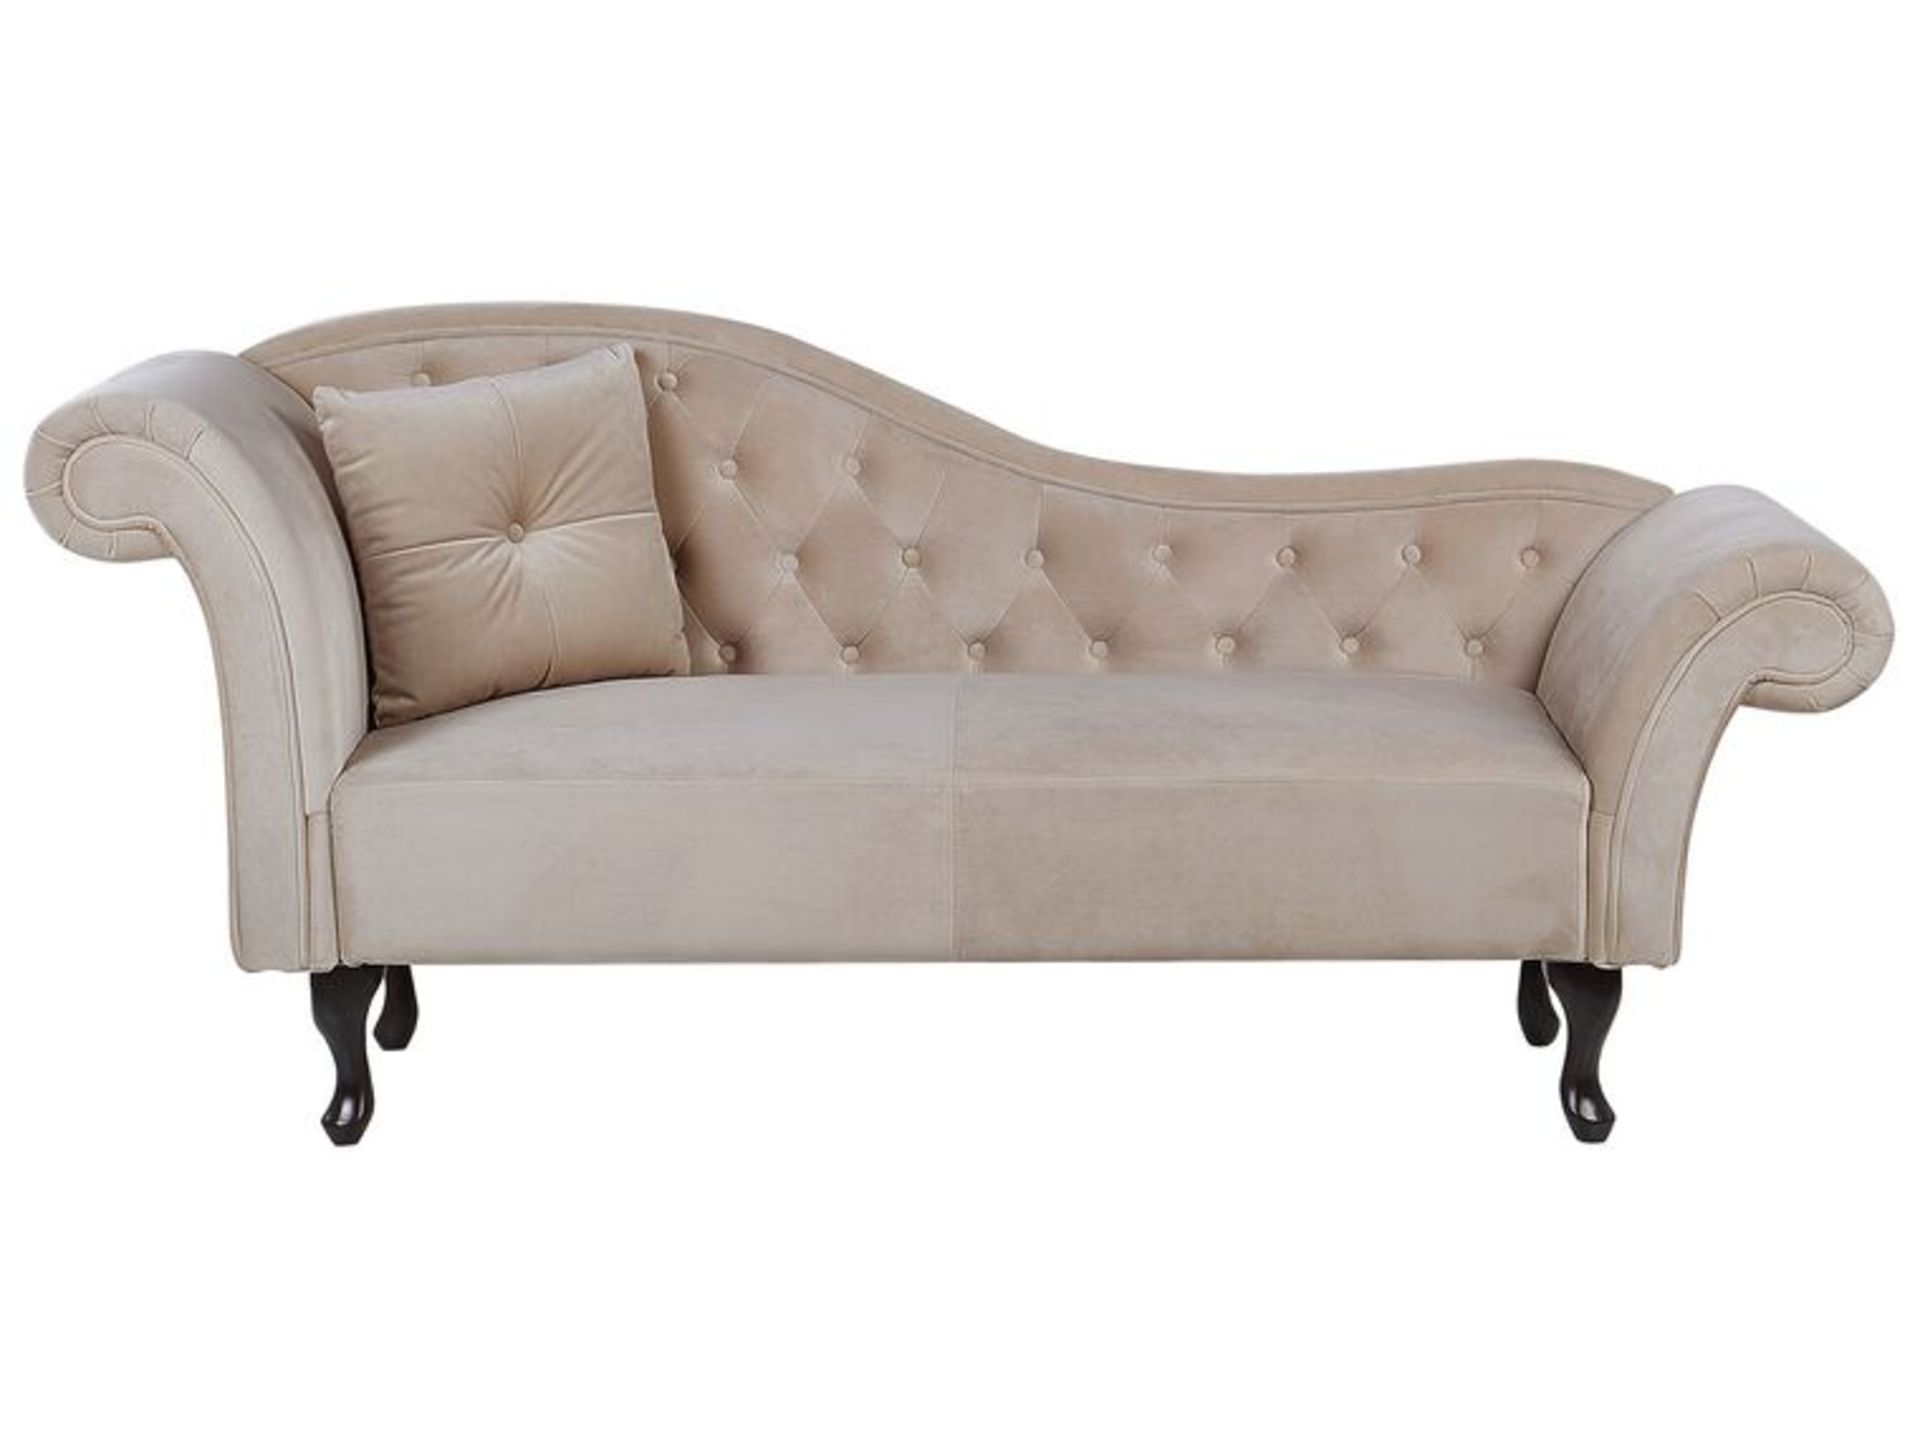 Lattes Left Hand Chaise Lounge Velvet Beige. - R14. RRP £779.99. This classic chaise lounge is the